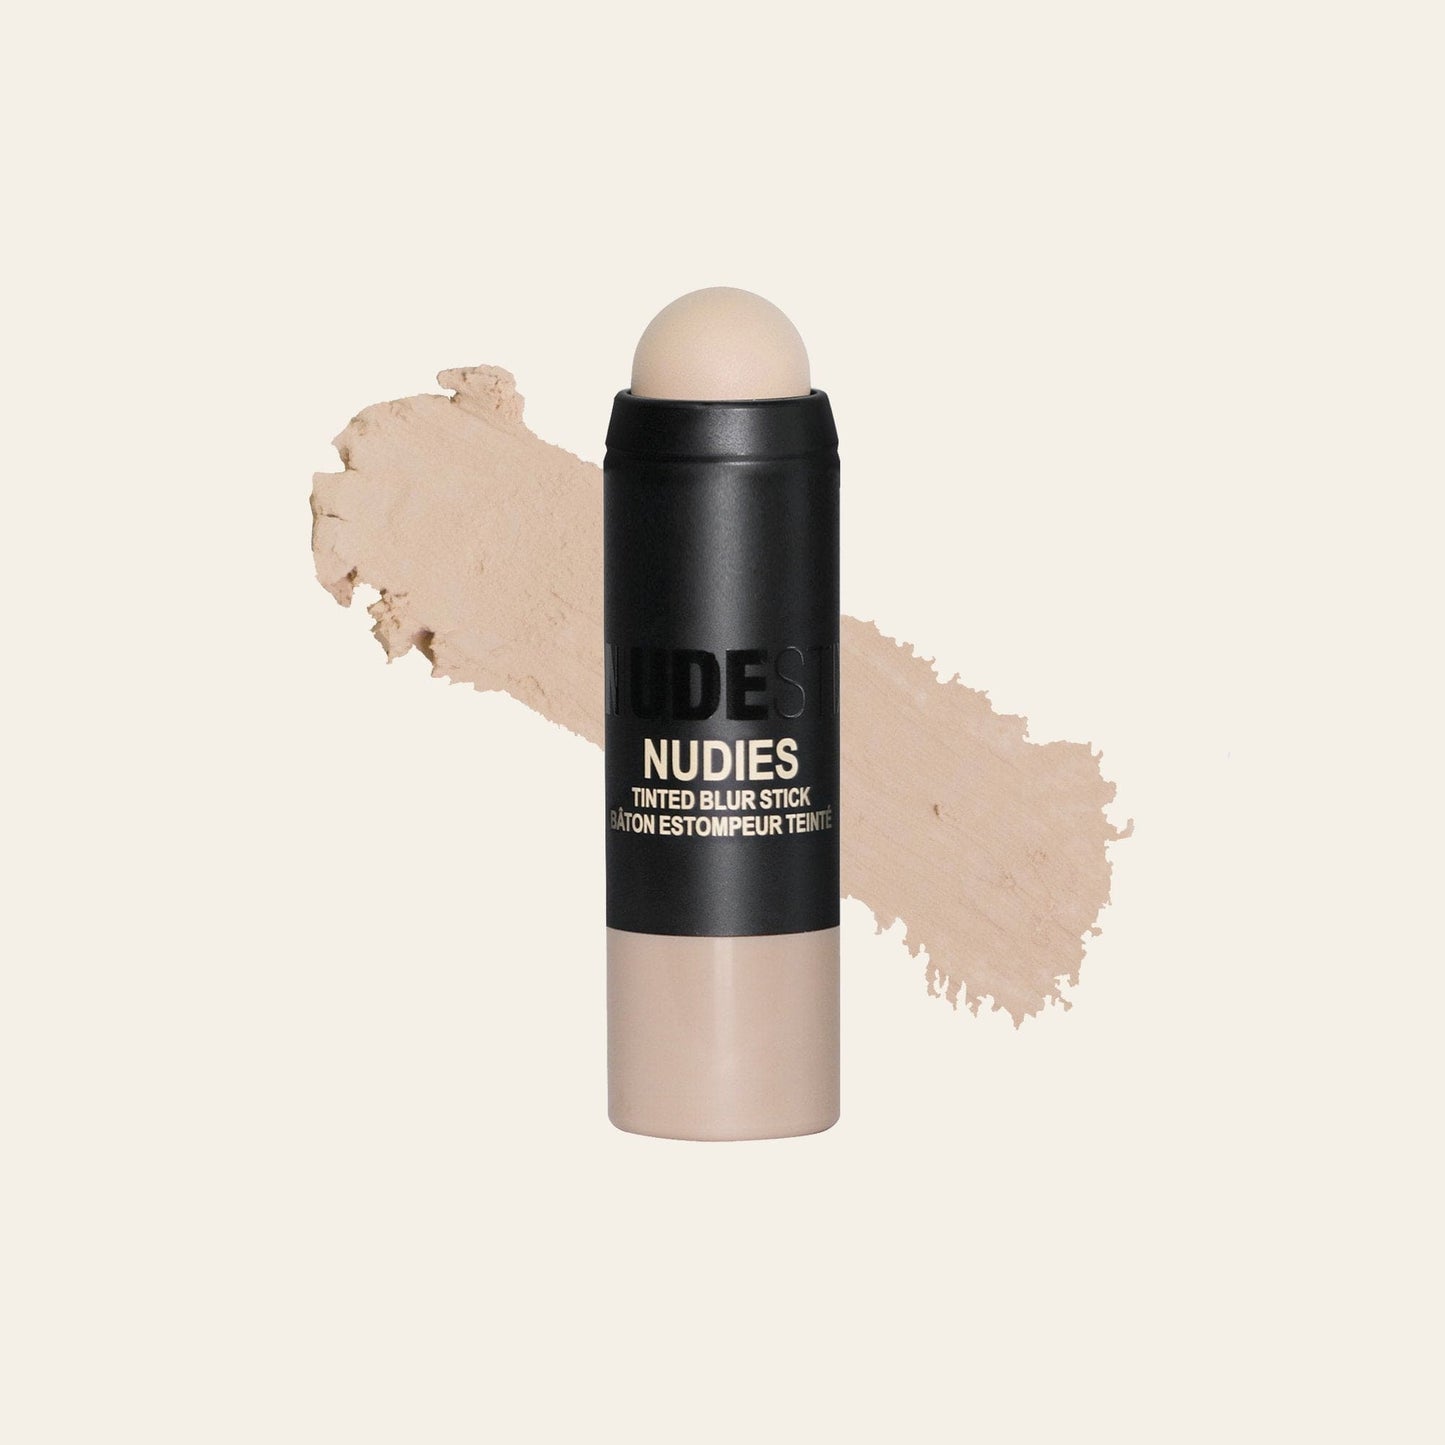 Tinted Blur Foundation Stick in shade Light 1